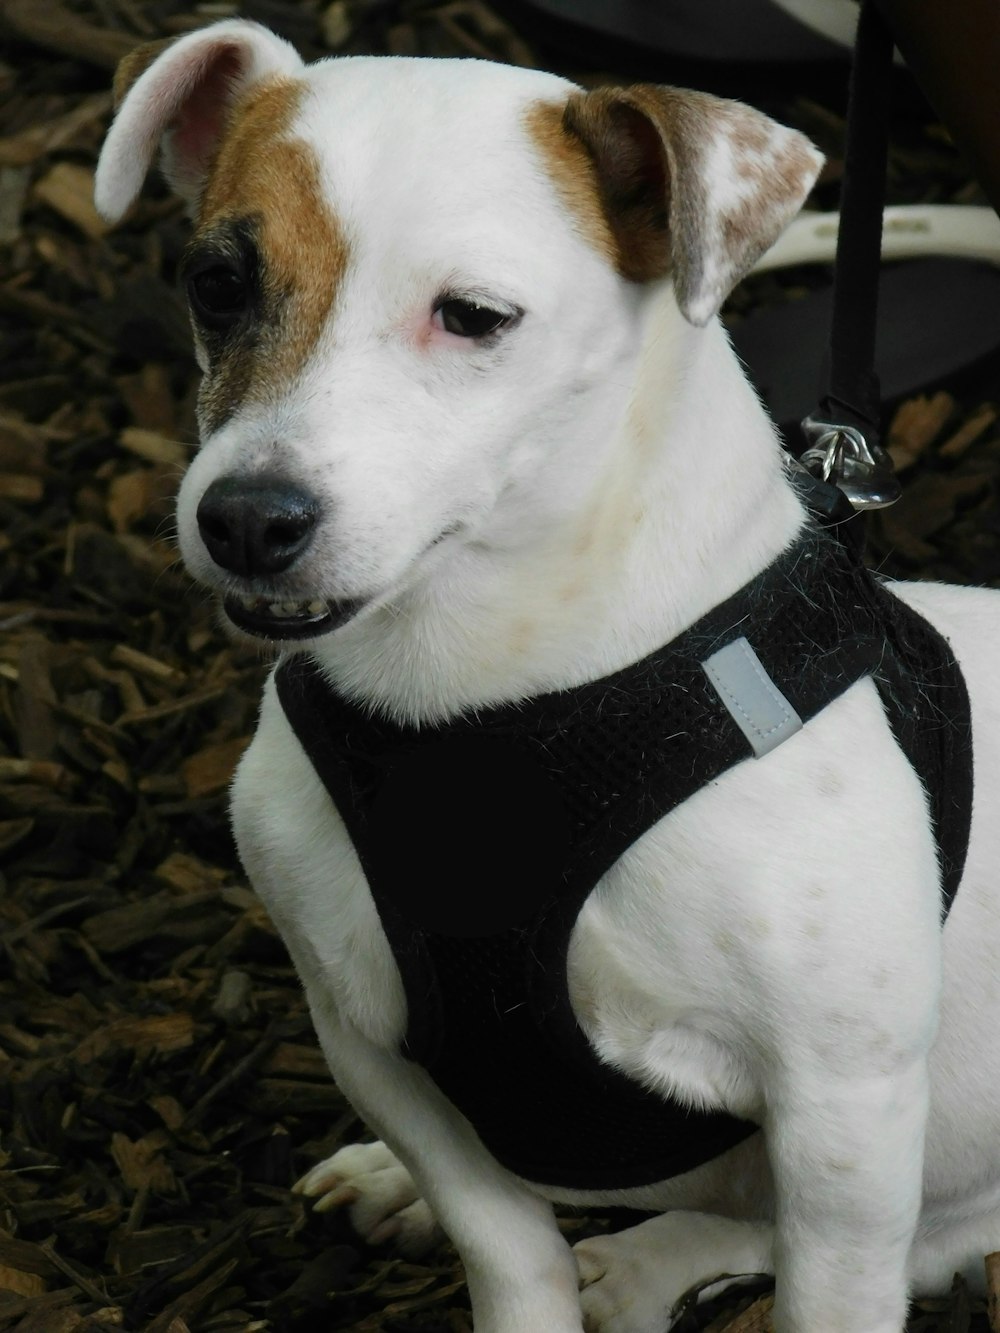 a white and brown dog wearing a black harness